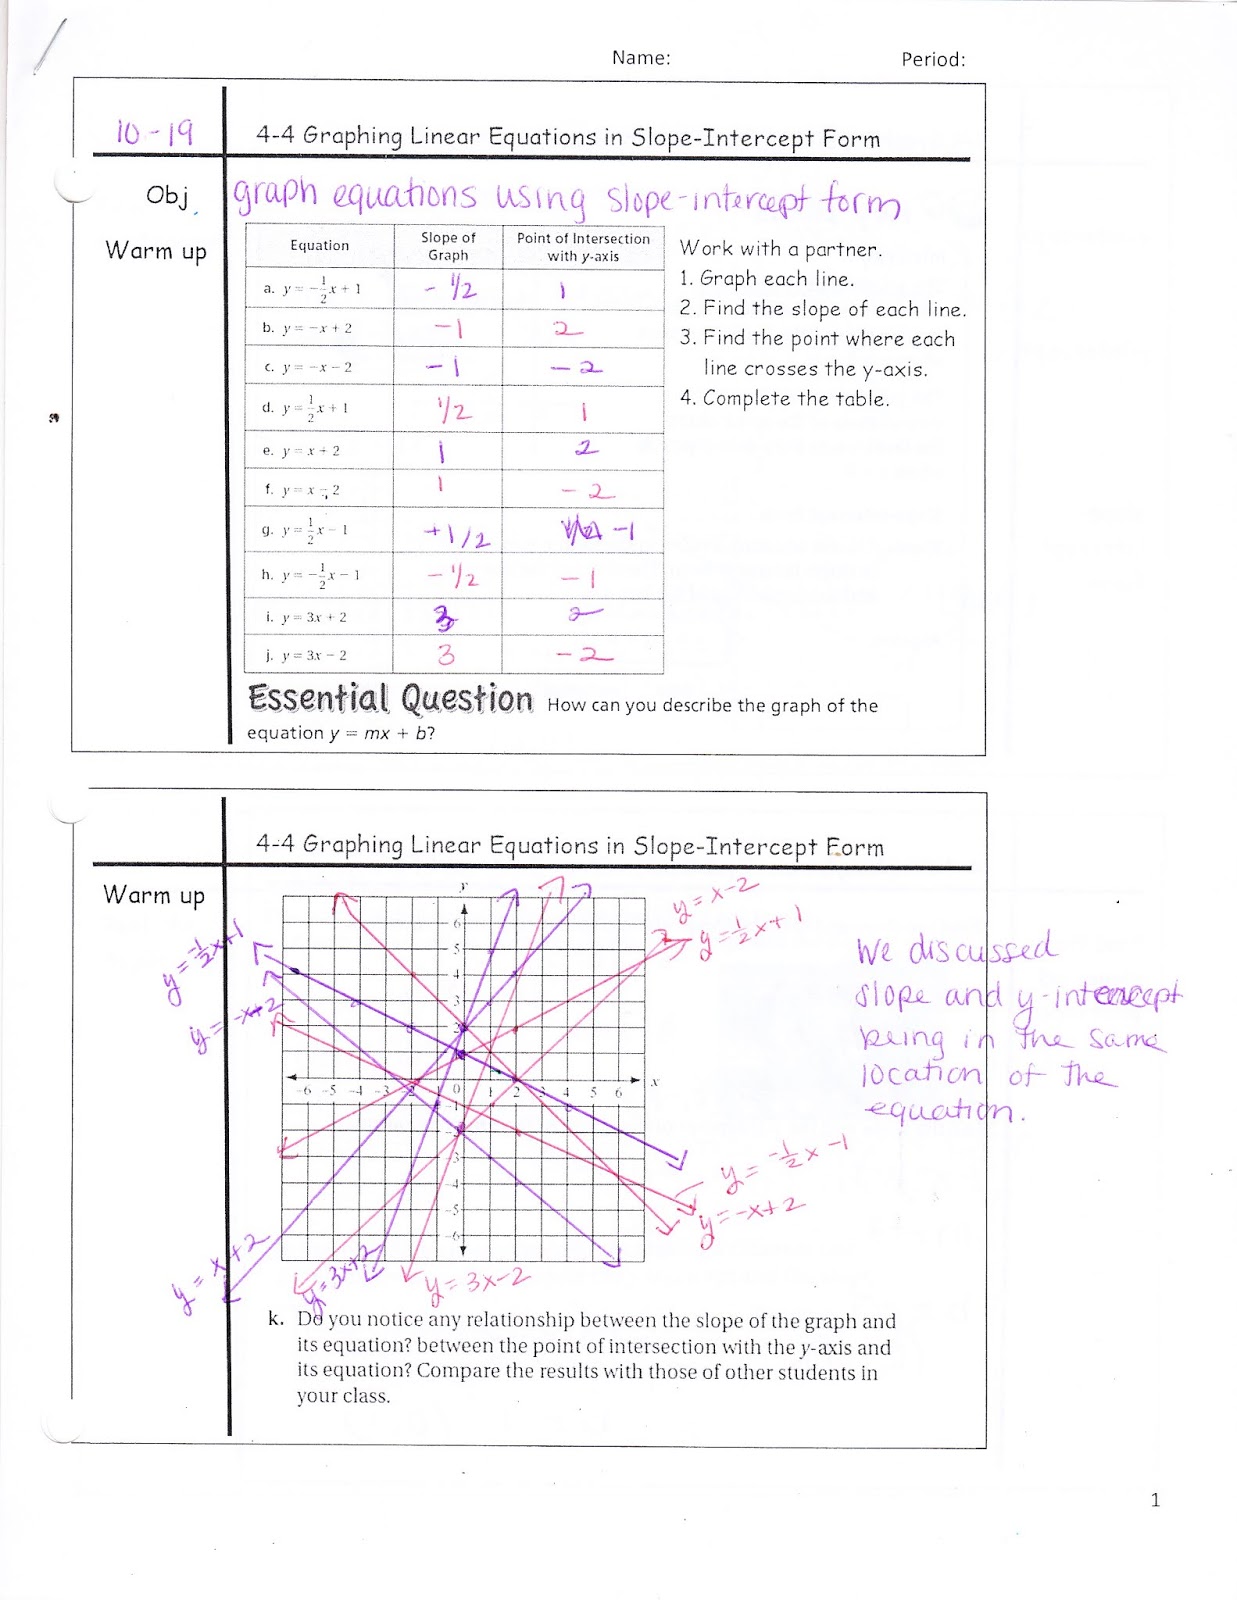 Ms. Jean's ACCEL 7 Blog: 4.4 Graphing Linear Equations in Slope